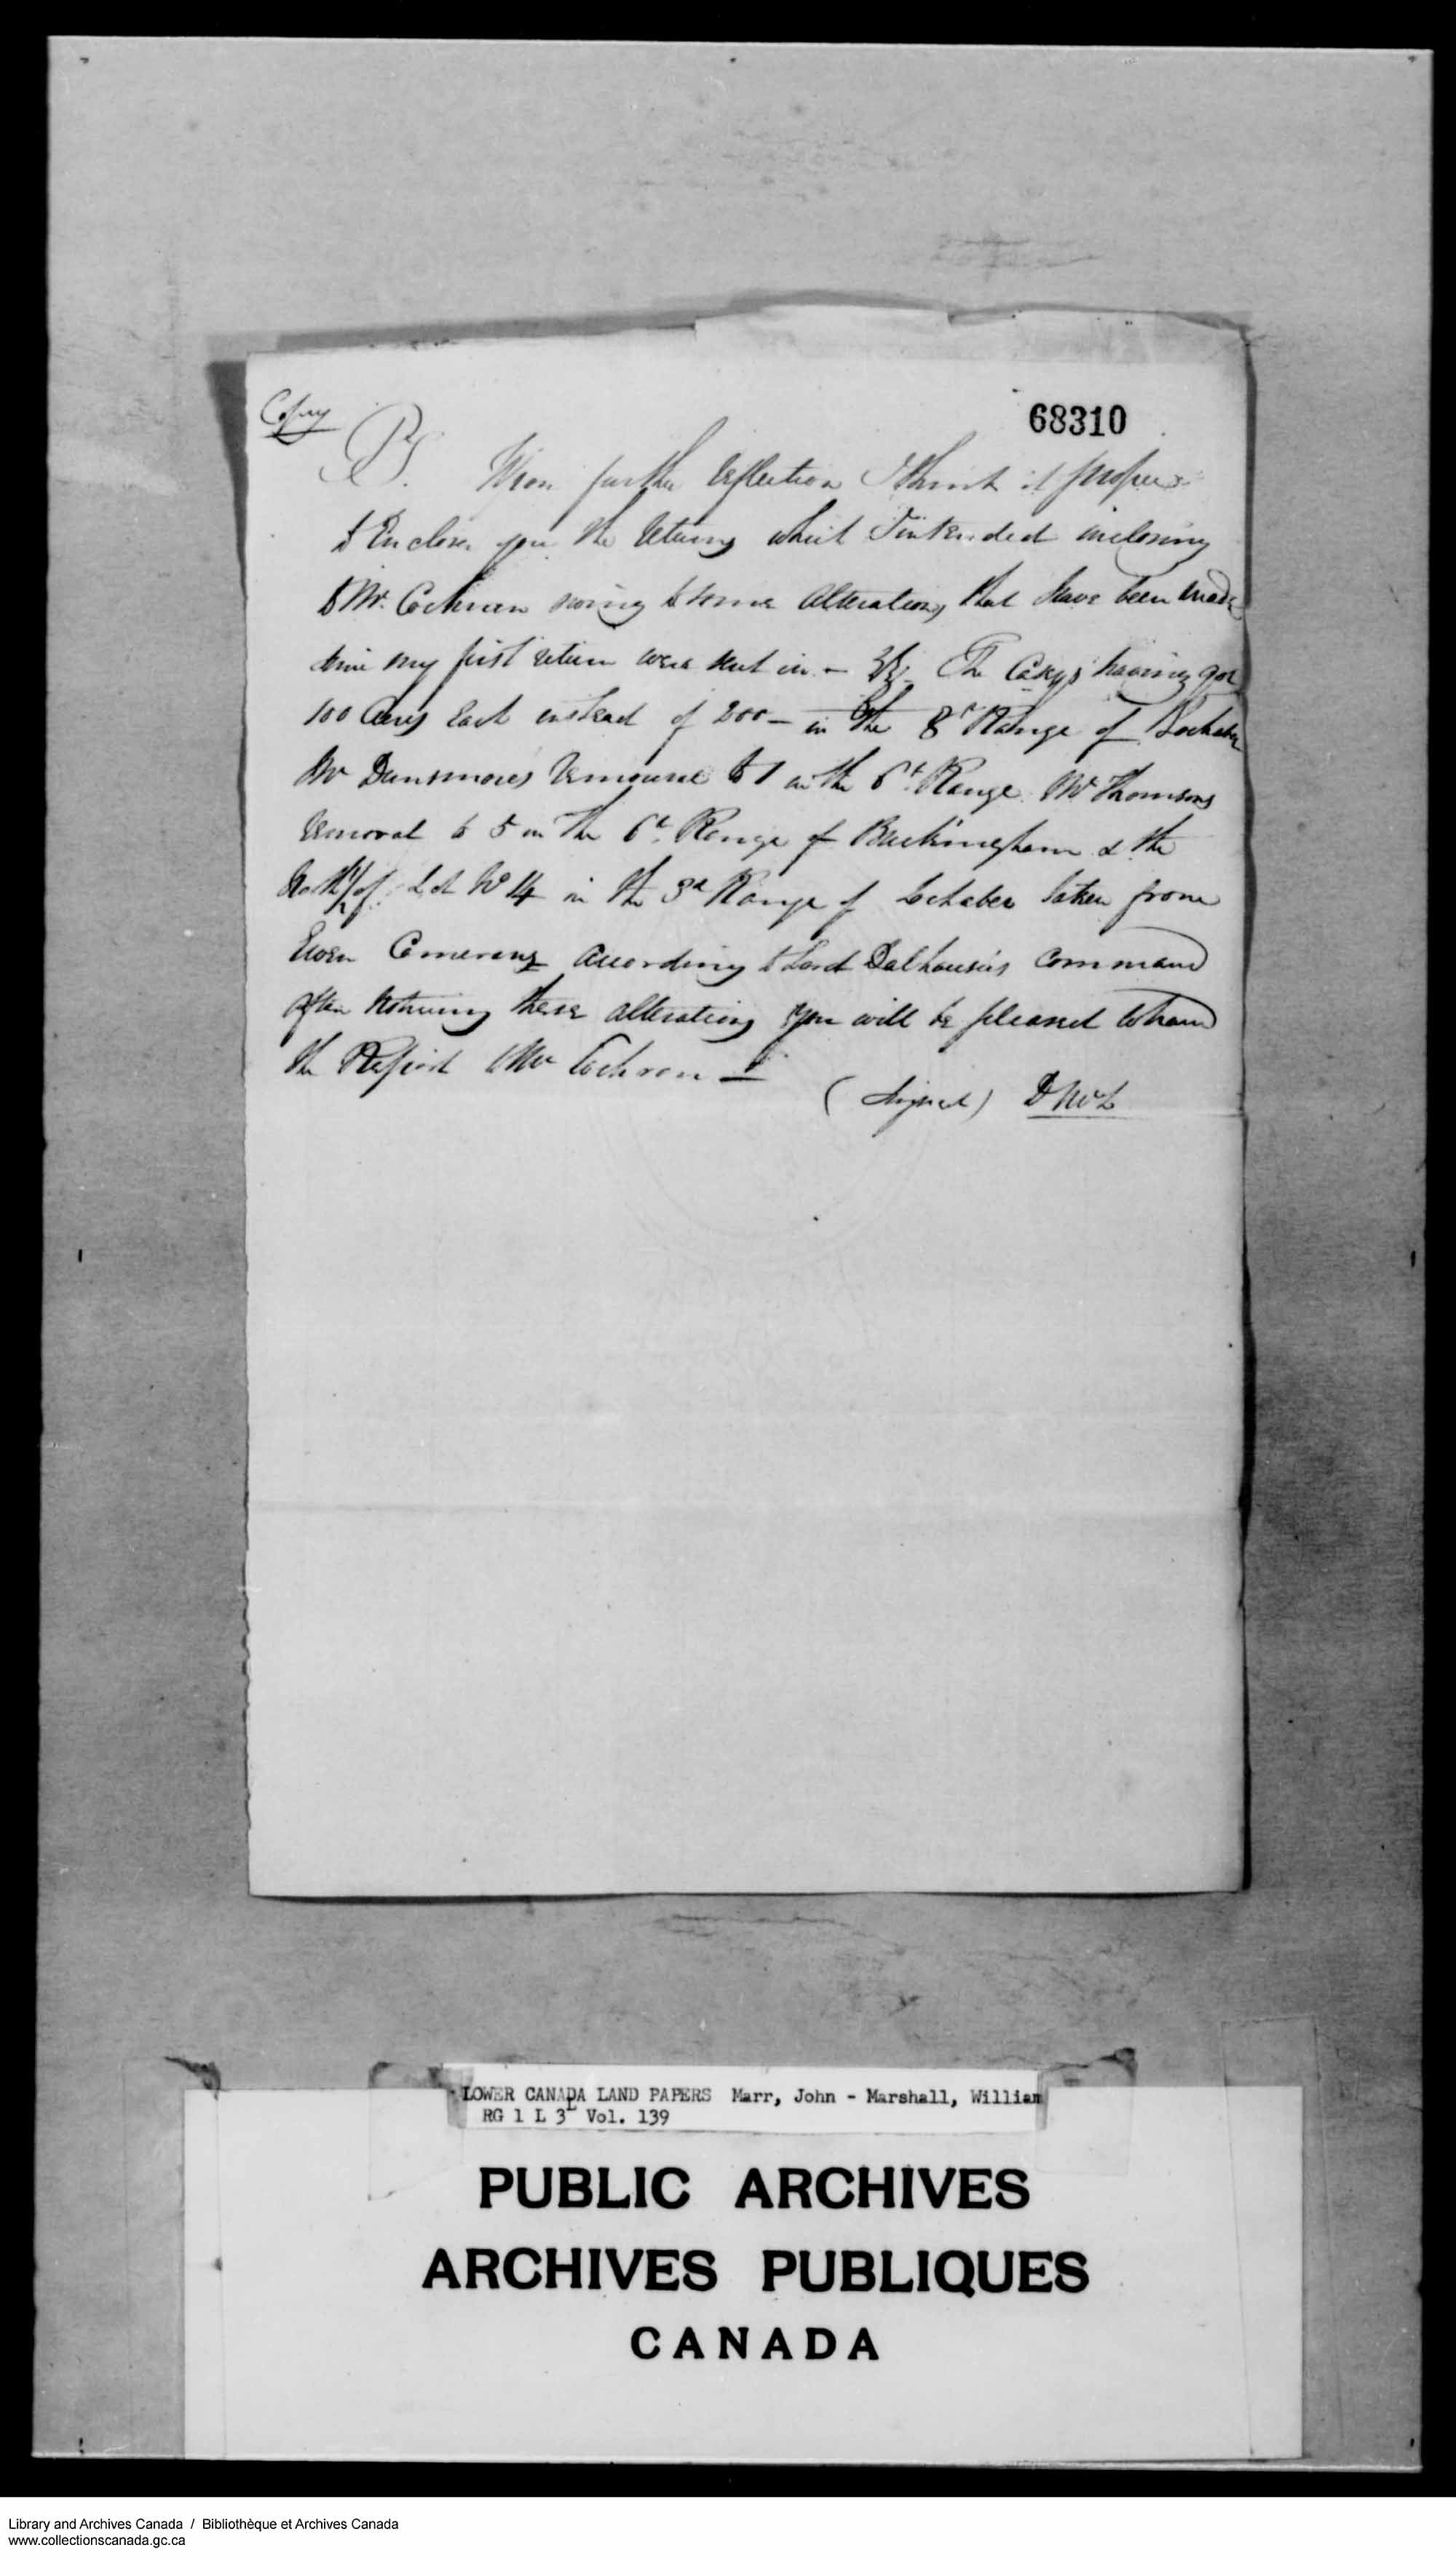 Digitized page of  for Image No.: e008713566